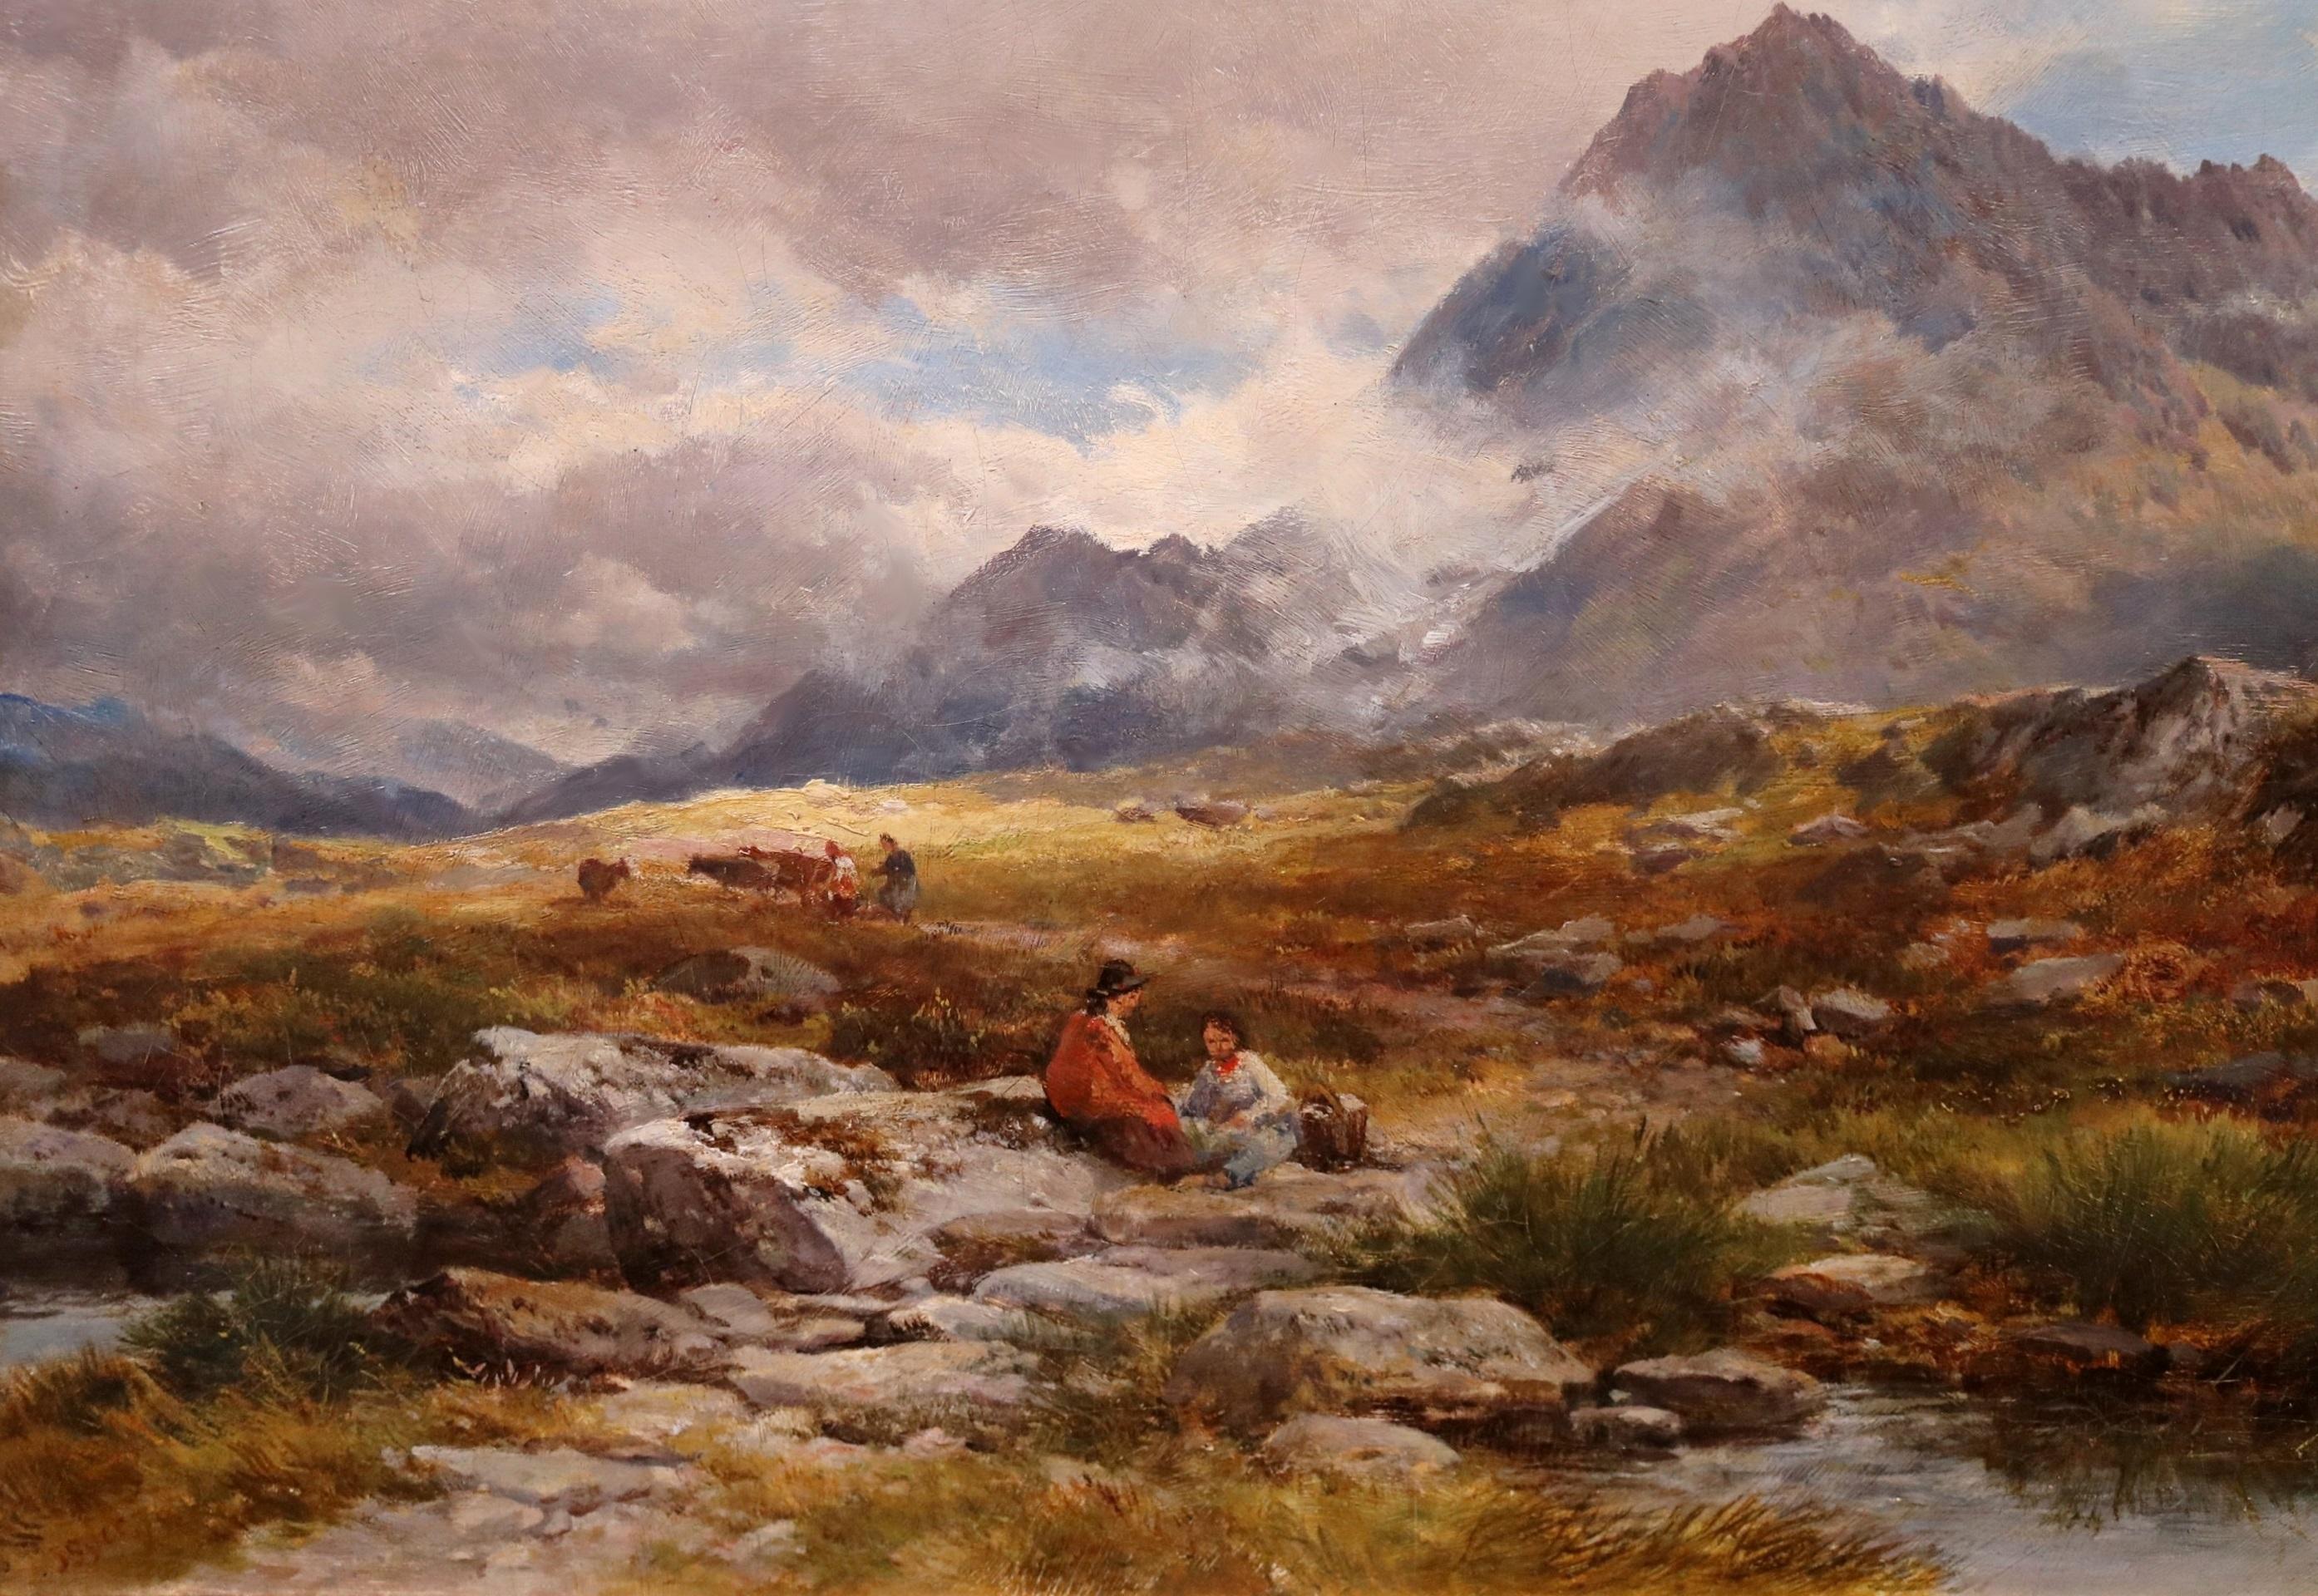 Before Glyder Fawr - Large 19th Century Oil Painting Welsh Mountain Landscape  7